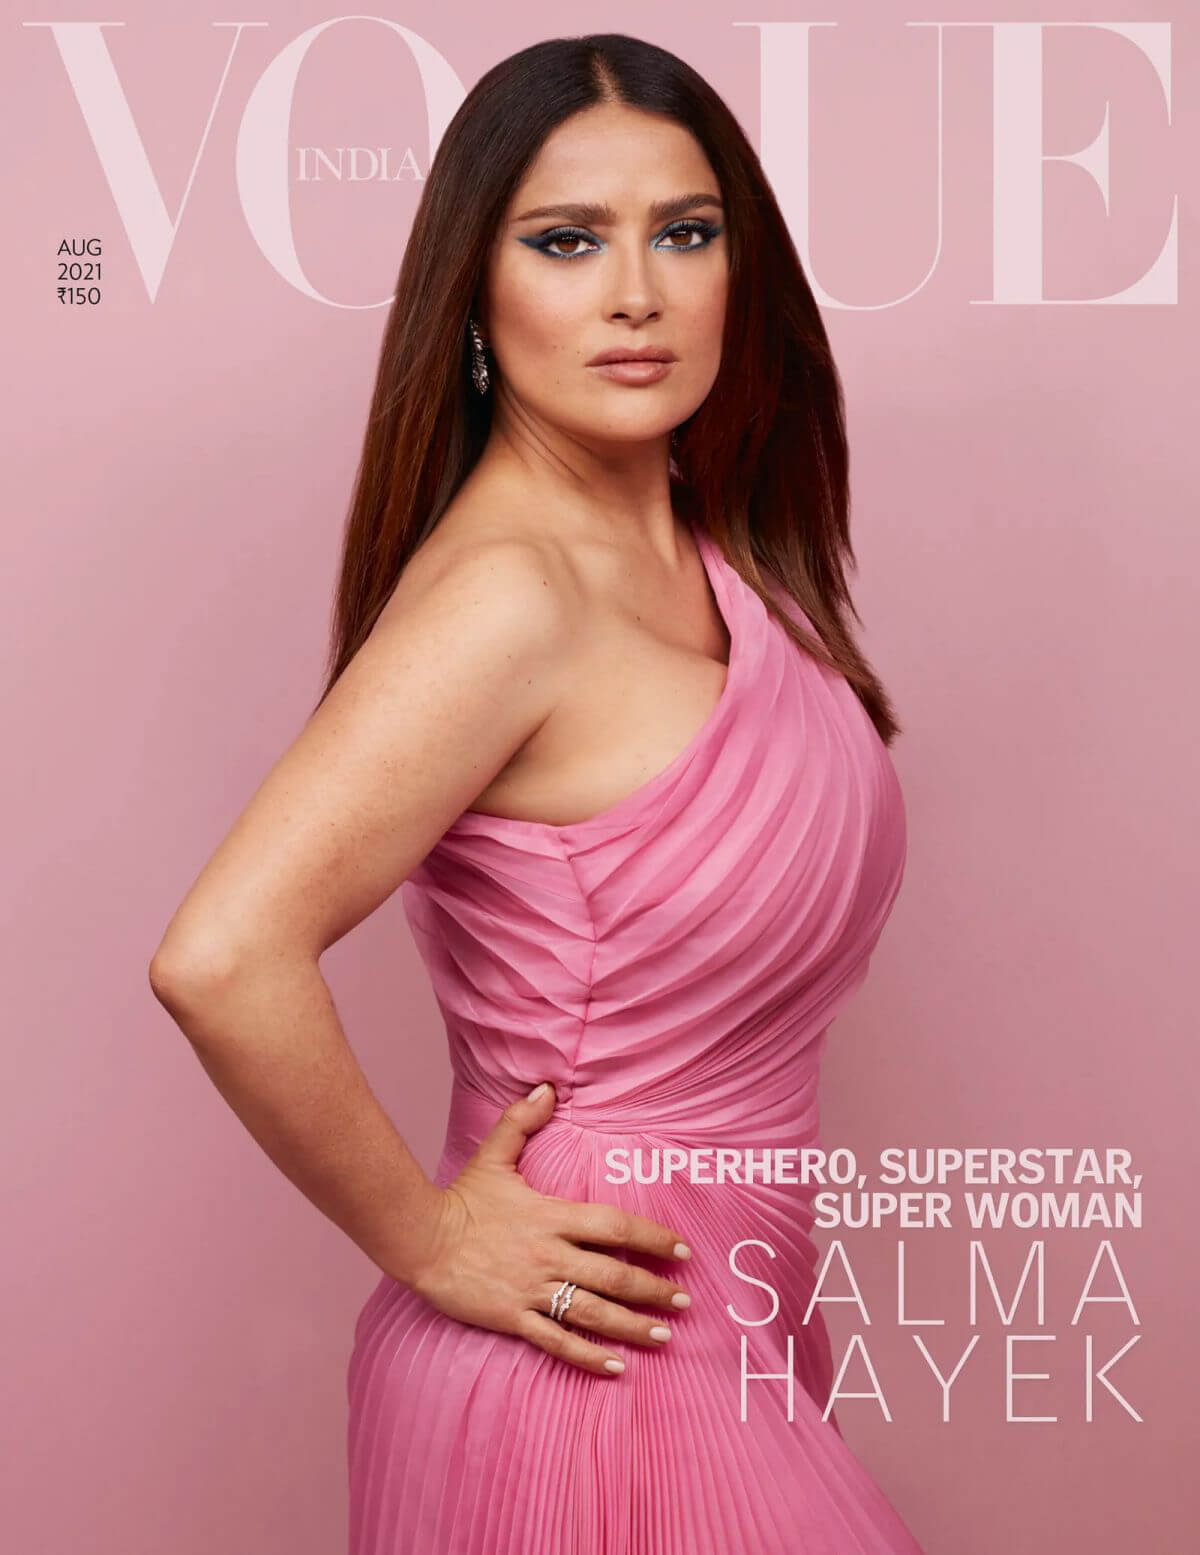 Mexican Actress Salma Hayek Photoshoot for Vogue Magazine, India August 2021